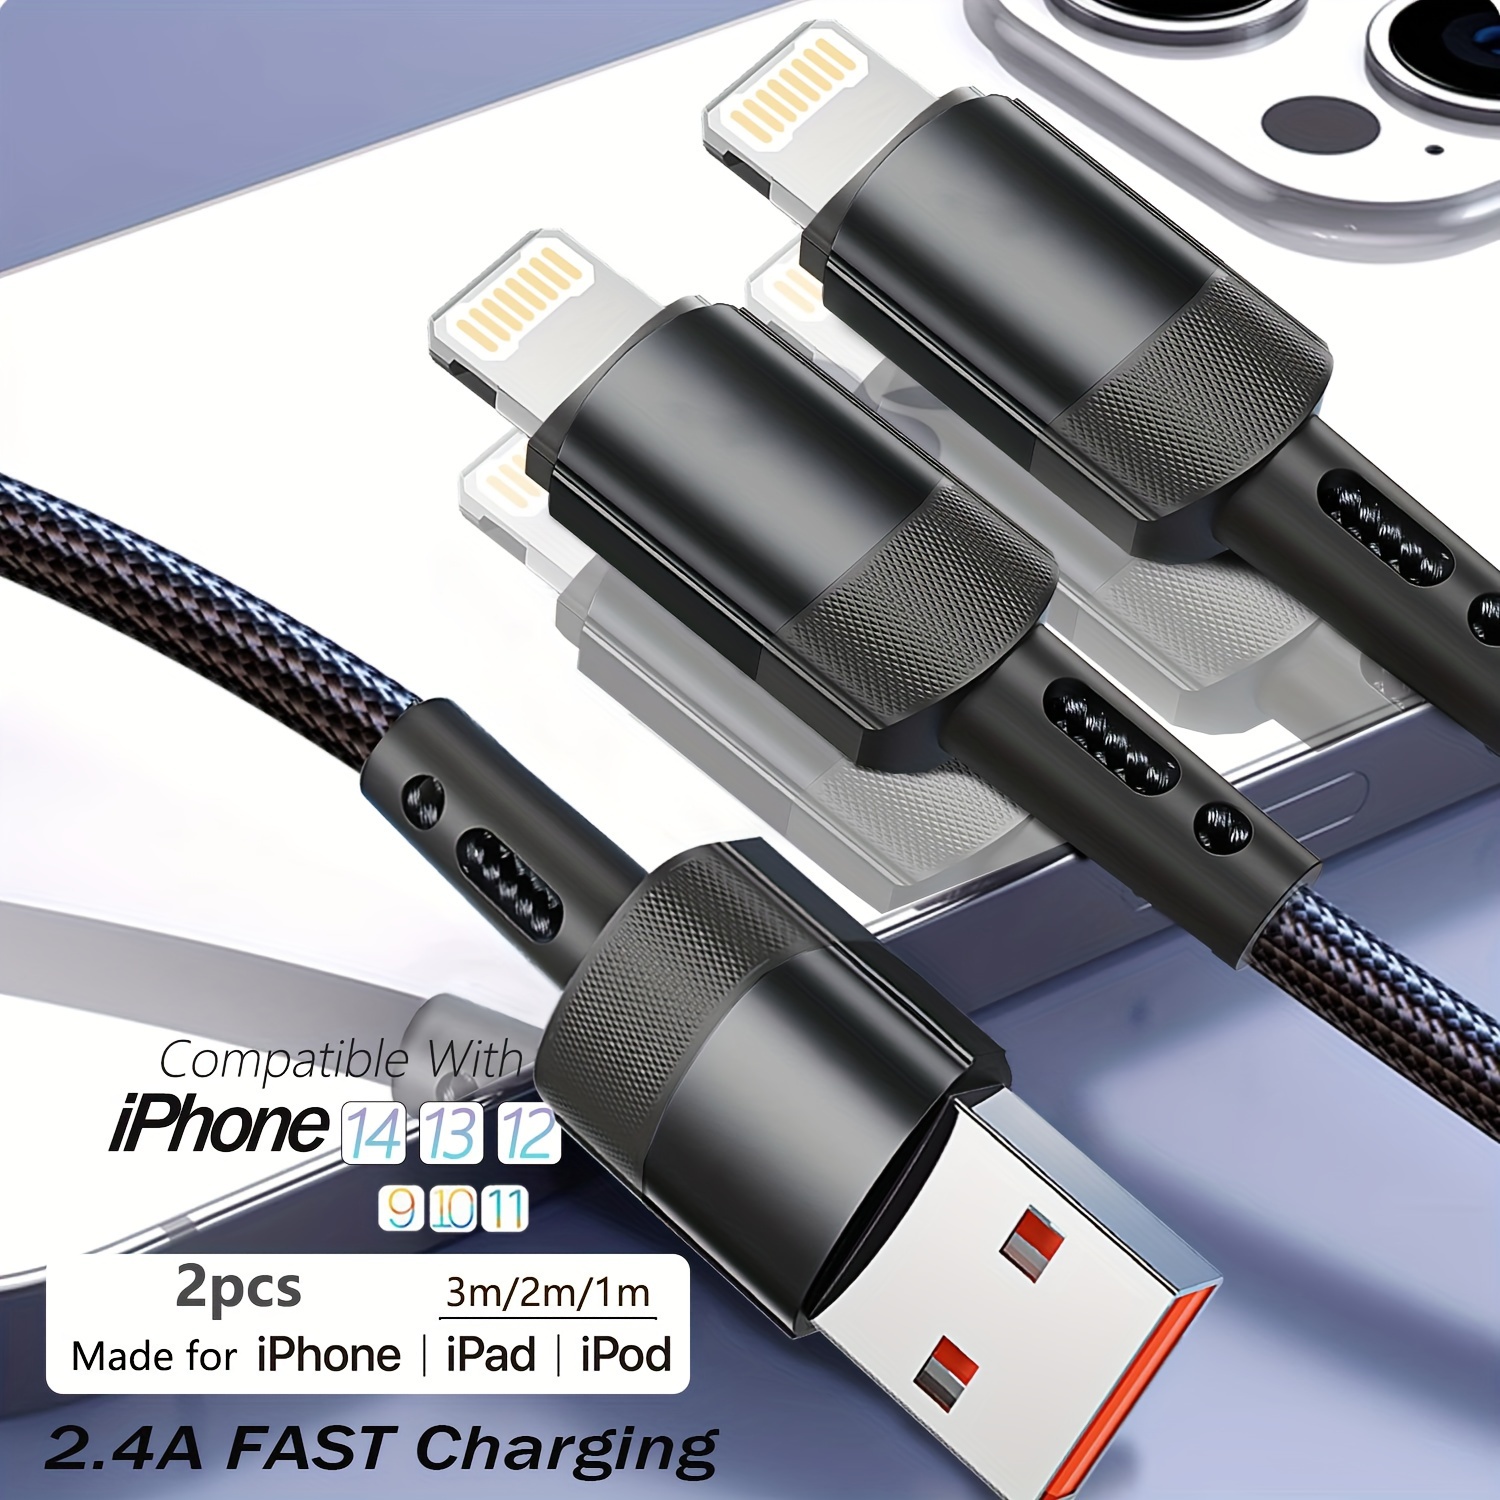 

2pcs For , 2.4a Fast Charging Cable, Mfi Certified Usb Port Support Fast Charging Cord For Iphone 14 Pro/14/13 Pro/12 Pro Max/12 Mini/11 Pro/xs/xr/ipad